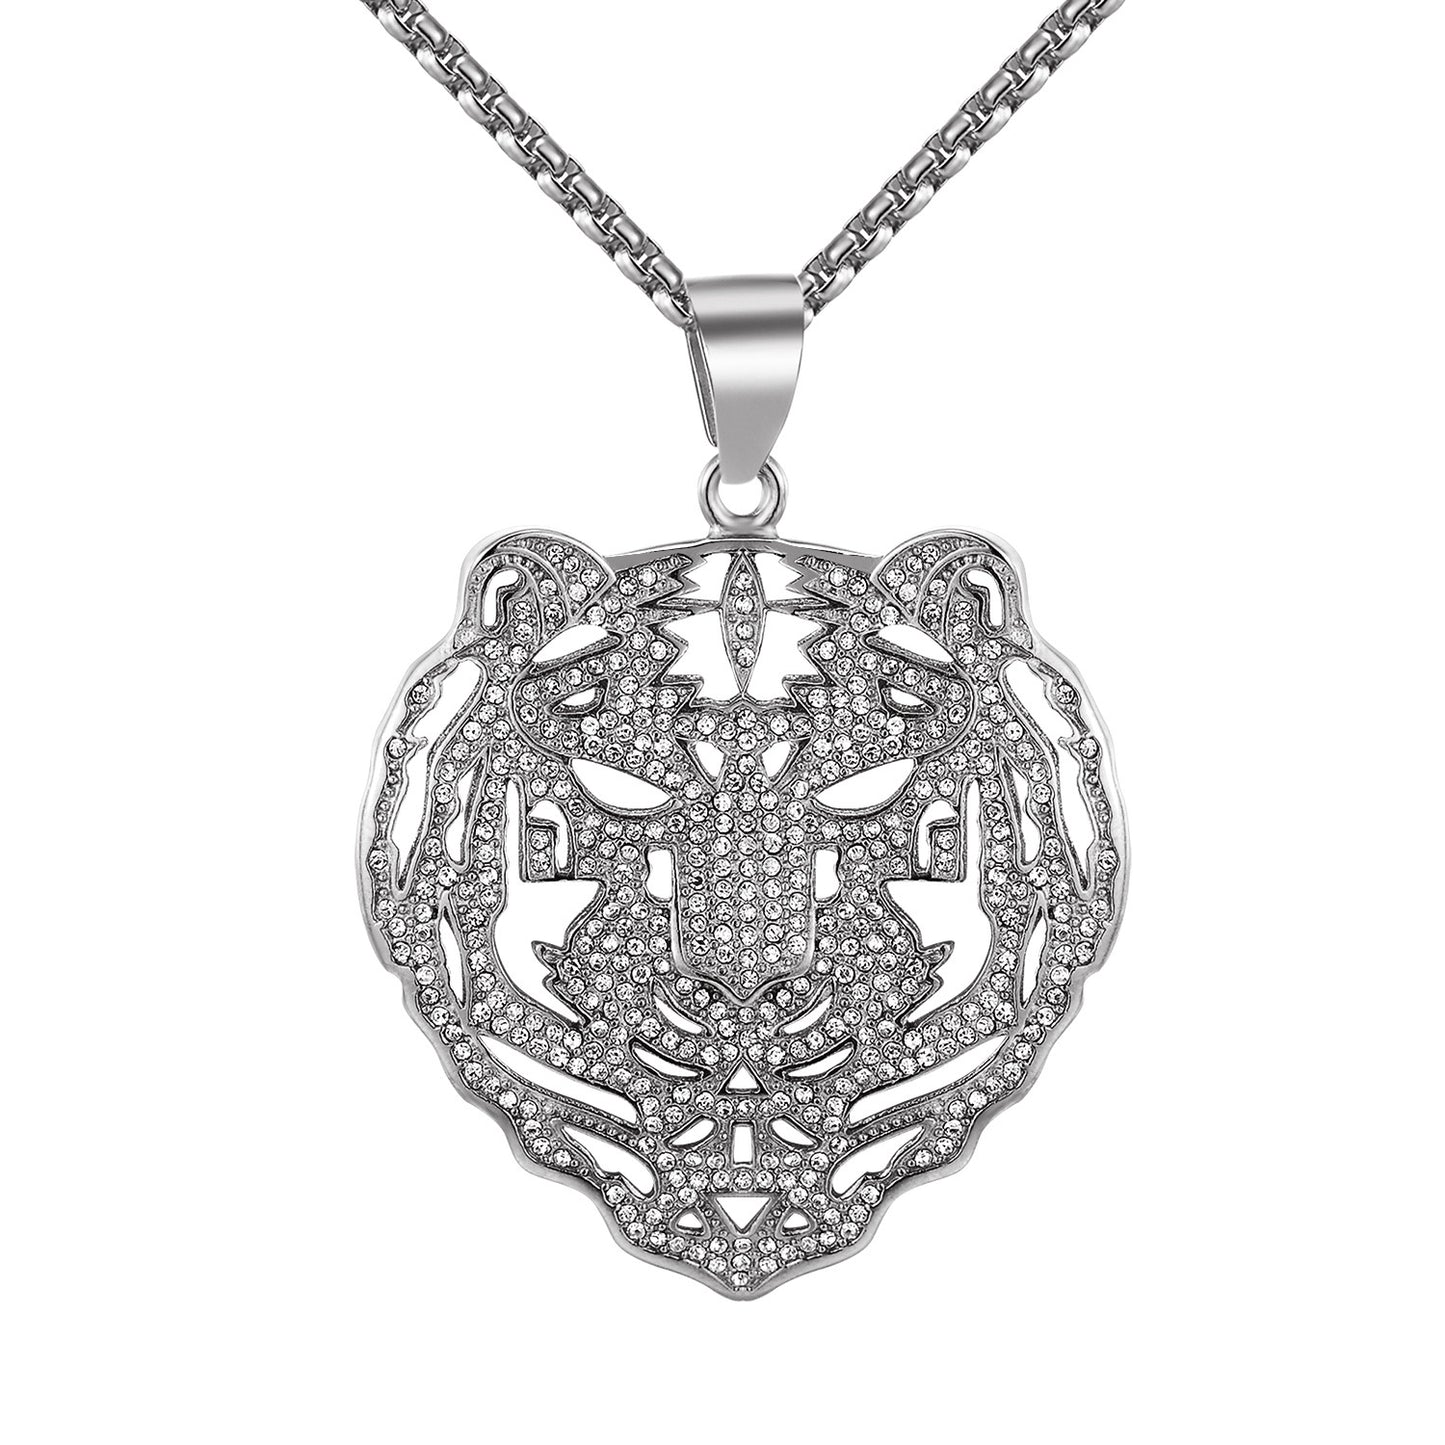 Stainless Steel Tiger Pendant Chain Bling Silver Tone 2.5" Simulated Diamond